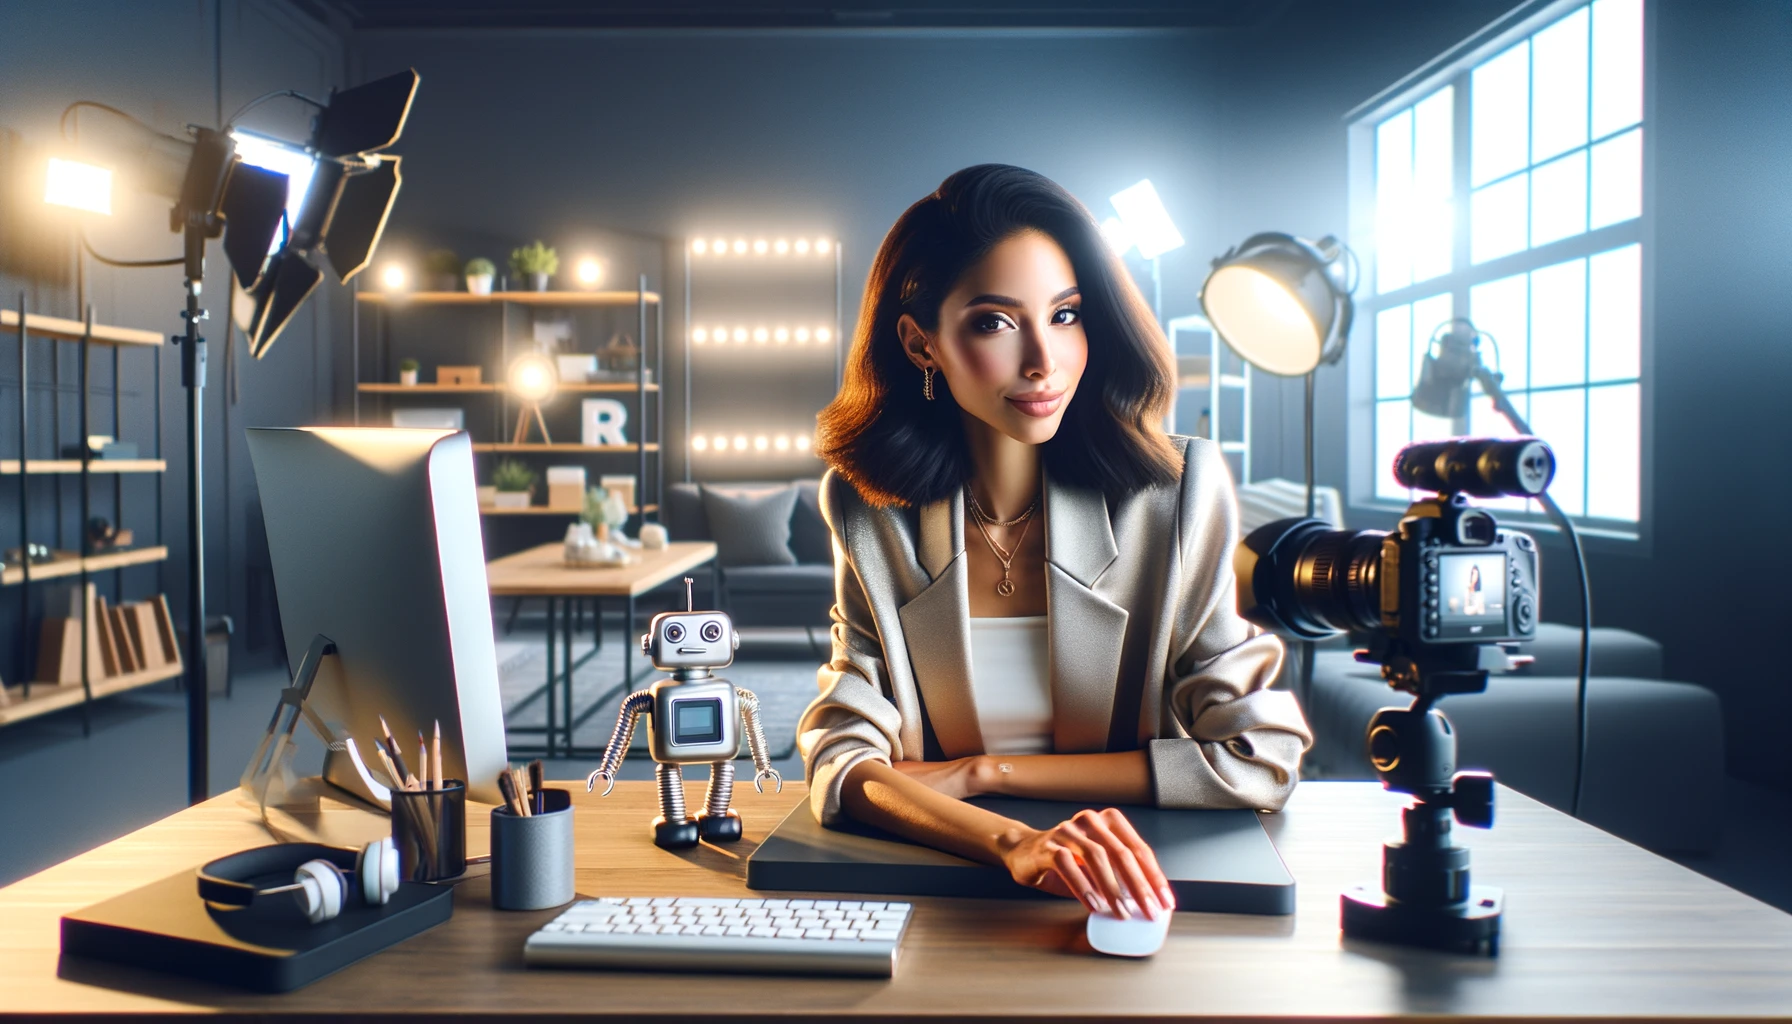 A stylish female e-commerce store owner of mixed descent is in a modern YouTube studio setting, sitting near a computer. The studio is equipped with professional lighting and recording equipment, creating an environment suitable for content creation. She is looking towards the camera with a confident and creative expression. On the desk, there is a small, whimsical robot, adding a unique and tech-savvy touch to the scene. The room is well-lit with both studio lights and natural light, emphasizing a professional yet personal workspace. The image should be photorealistic with clean lines and vibrant colors, capturing the essence of a dynamic YouTube studio.